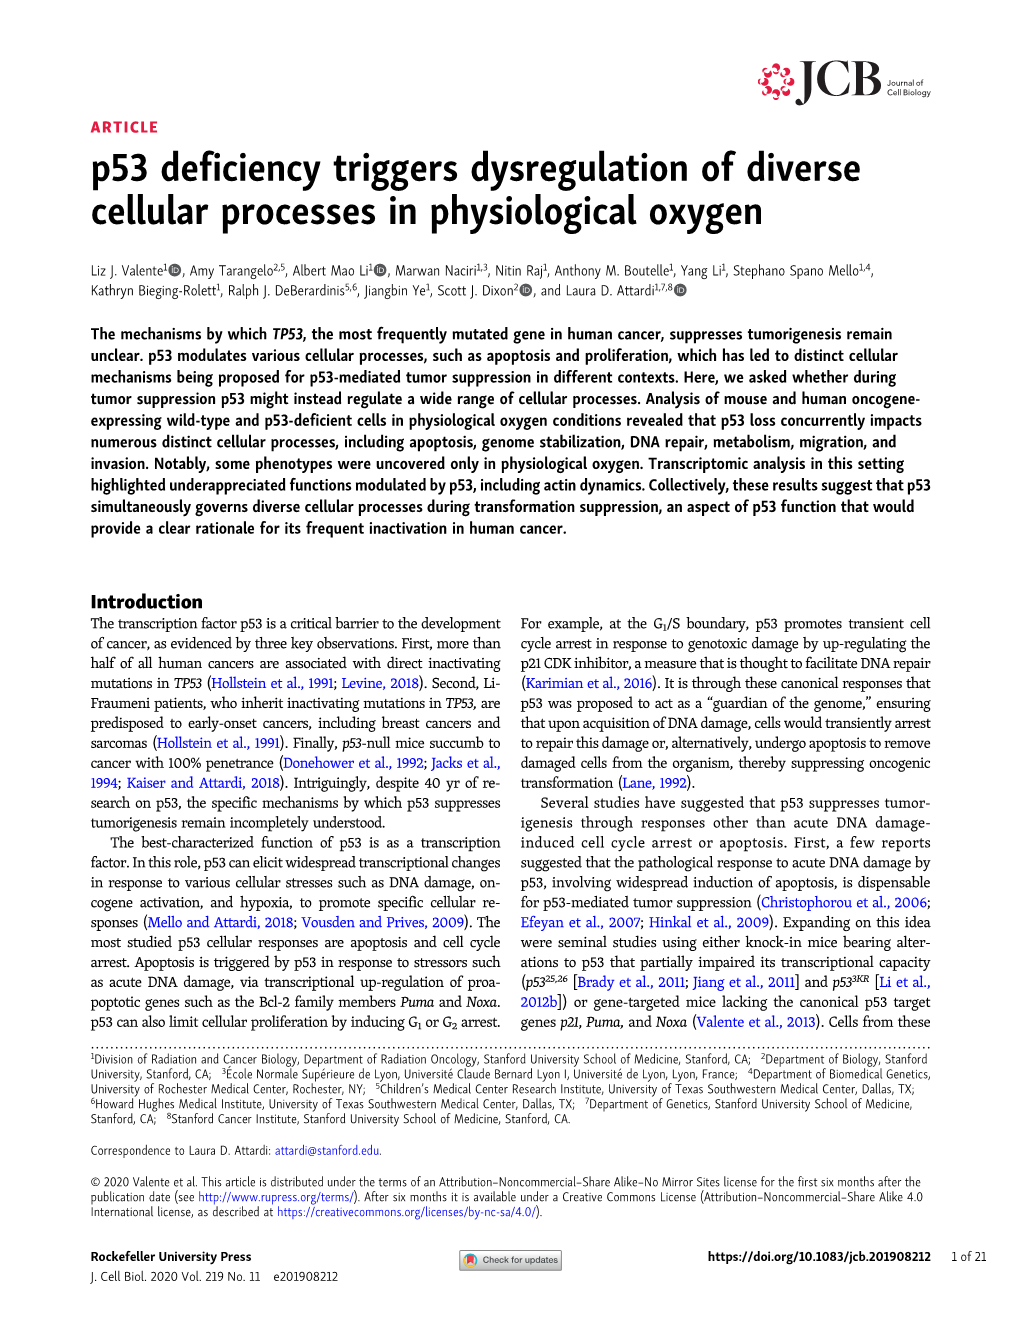 P53 Deficiency Triggers Dysregulation of Diverse Cellular Processes in Physiological Oxygen